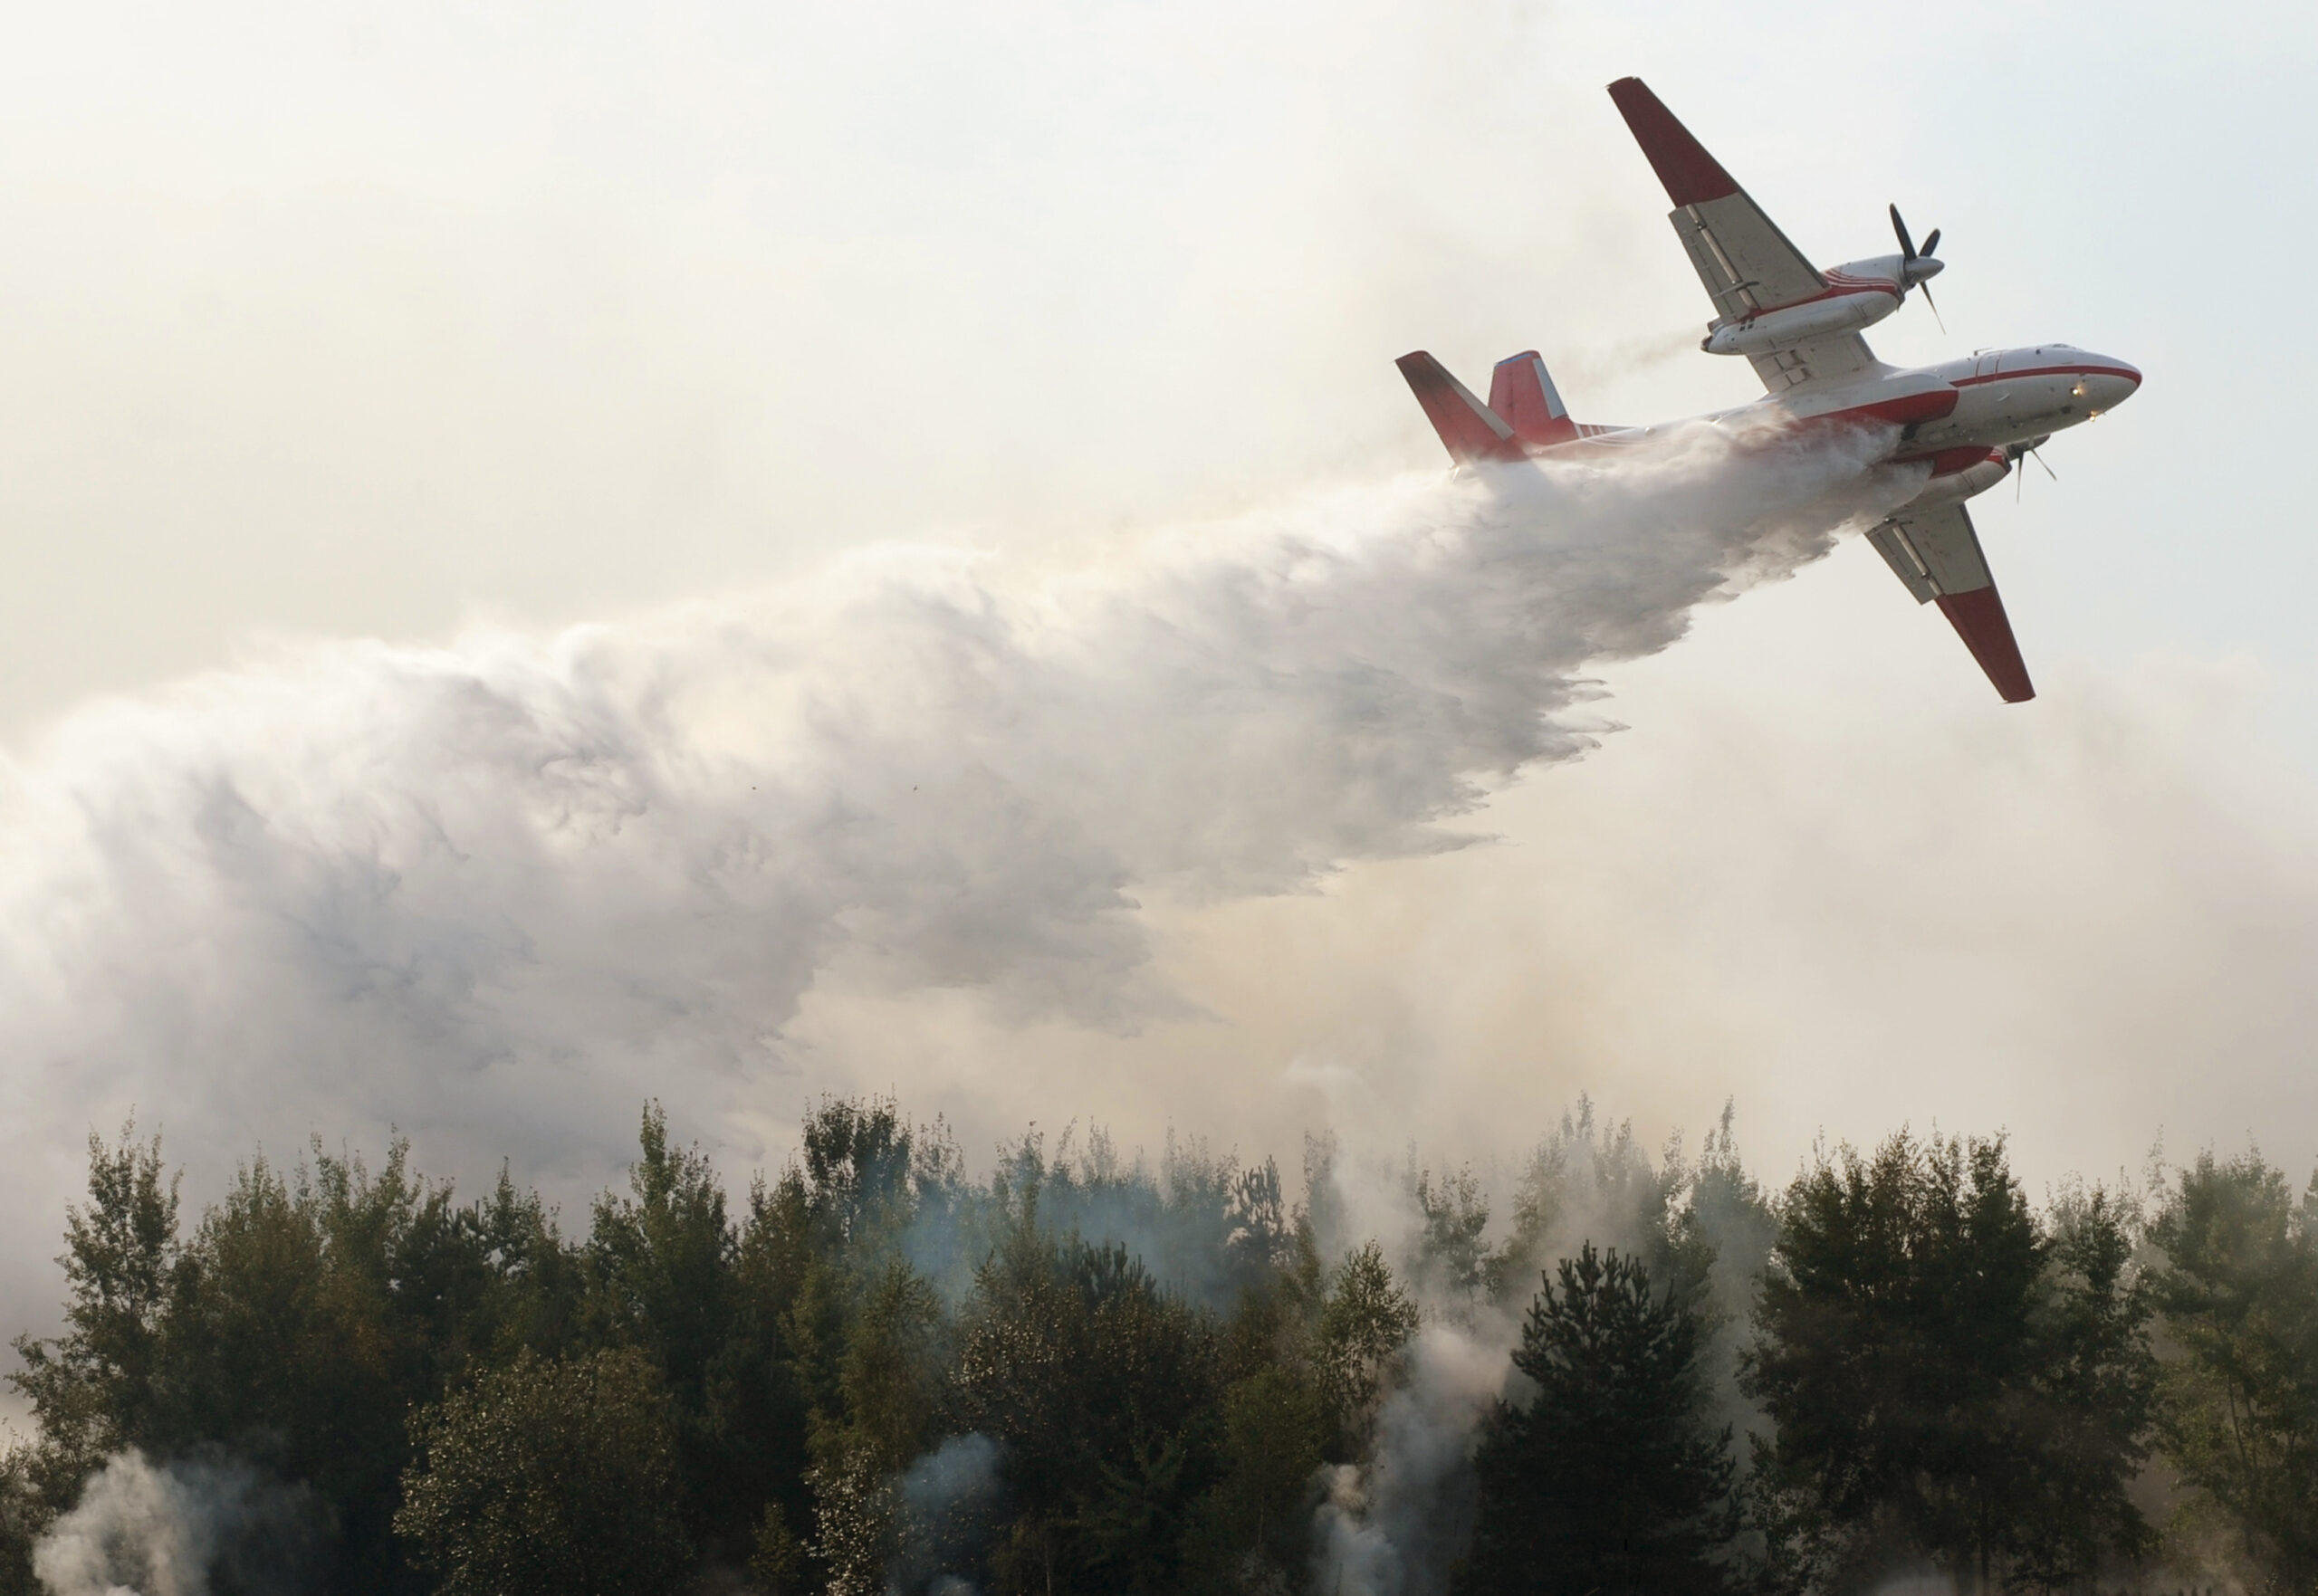 Judge in Montana Case Says Fire Retardant Drops Polluting Streams But Allows Use to Continue